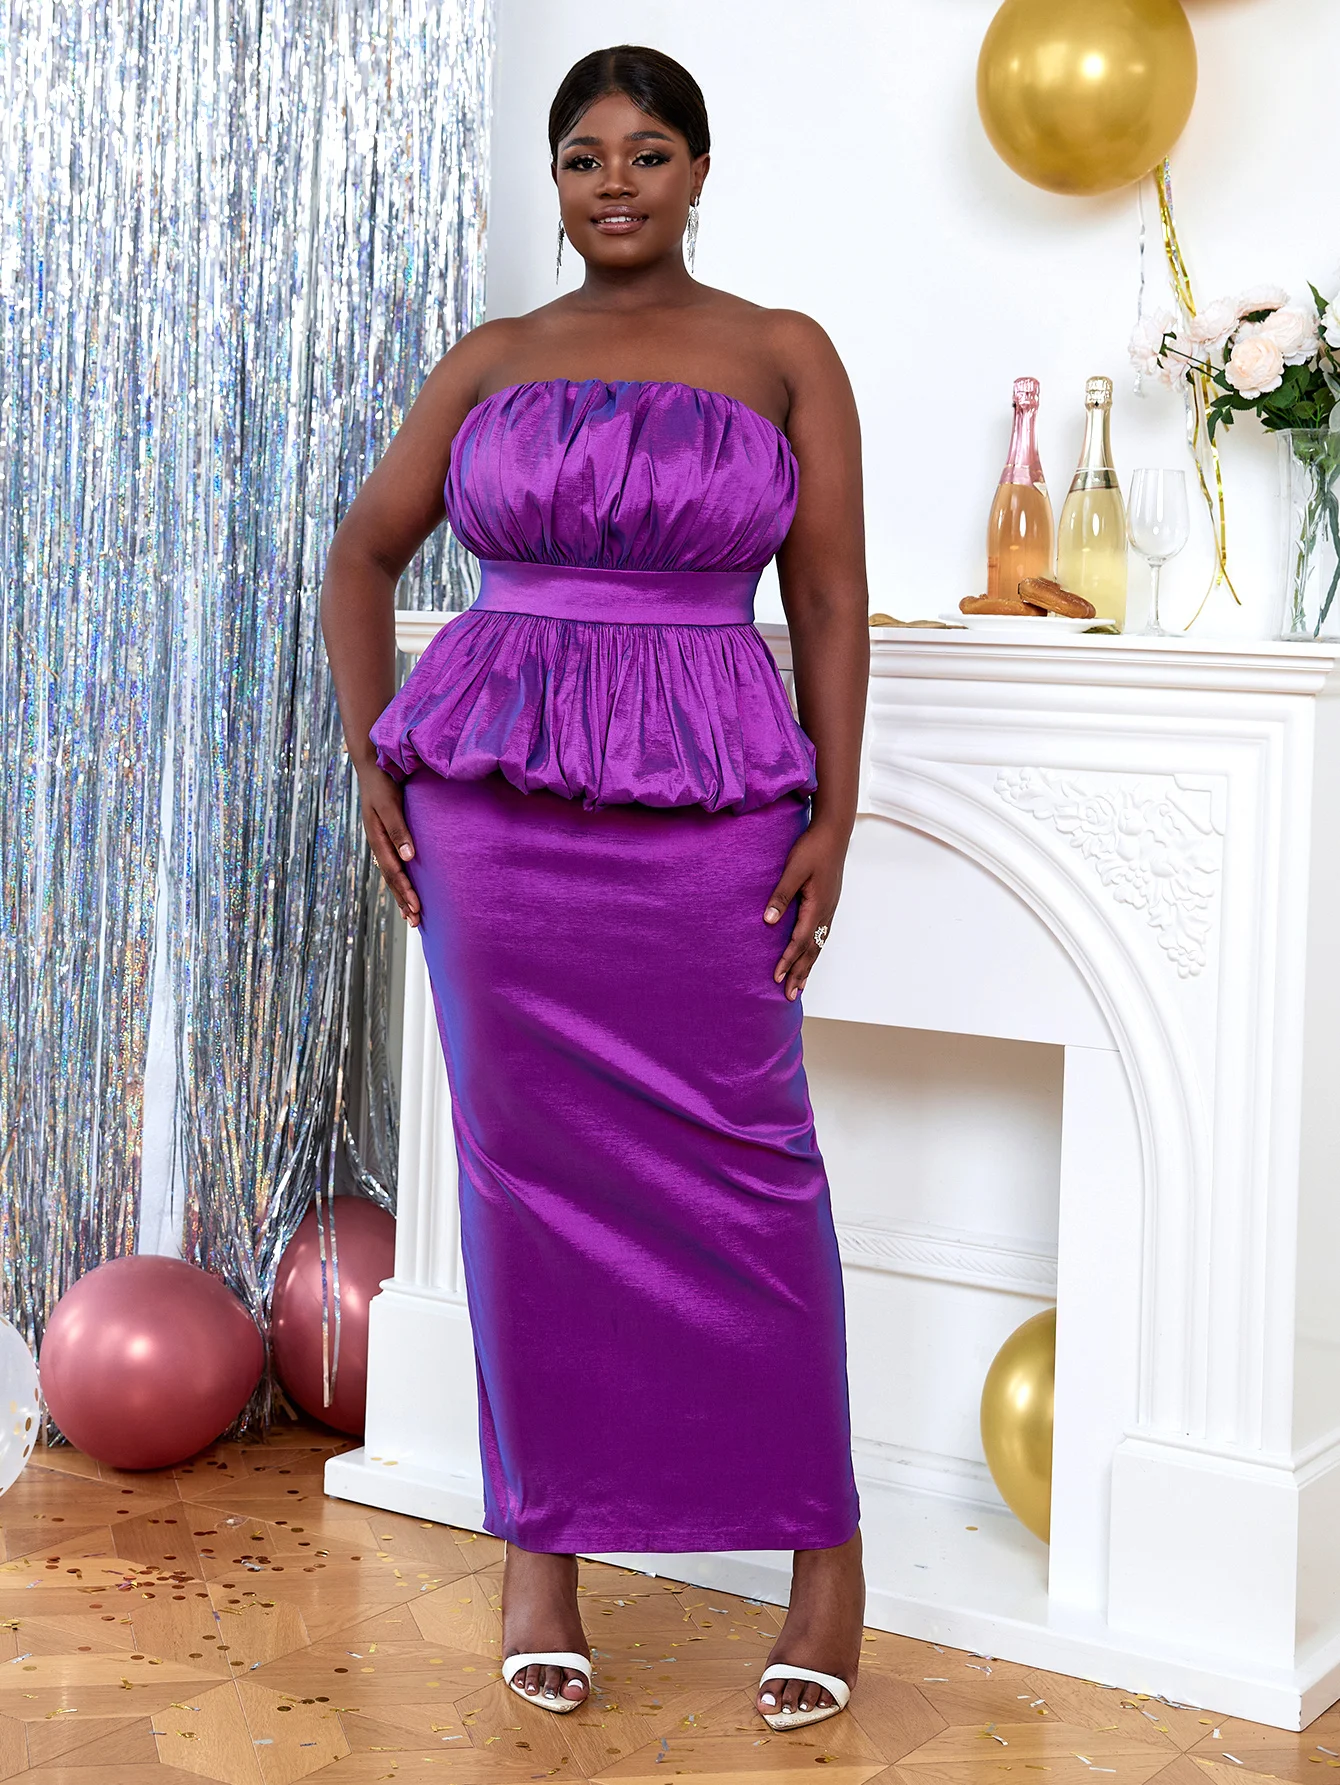 

Shiny Women Tube Top Purple Long Evening Party Dress Sexy Strapless Folds Ruffle Bodycon Slit African Female Cocktail Prom Gowns